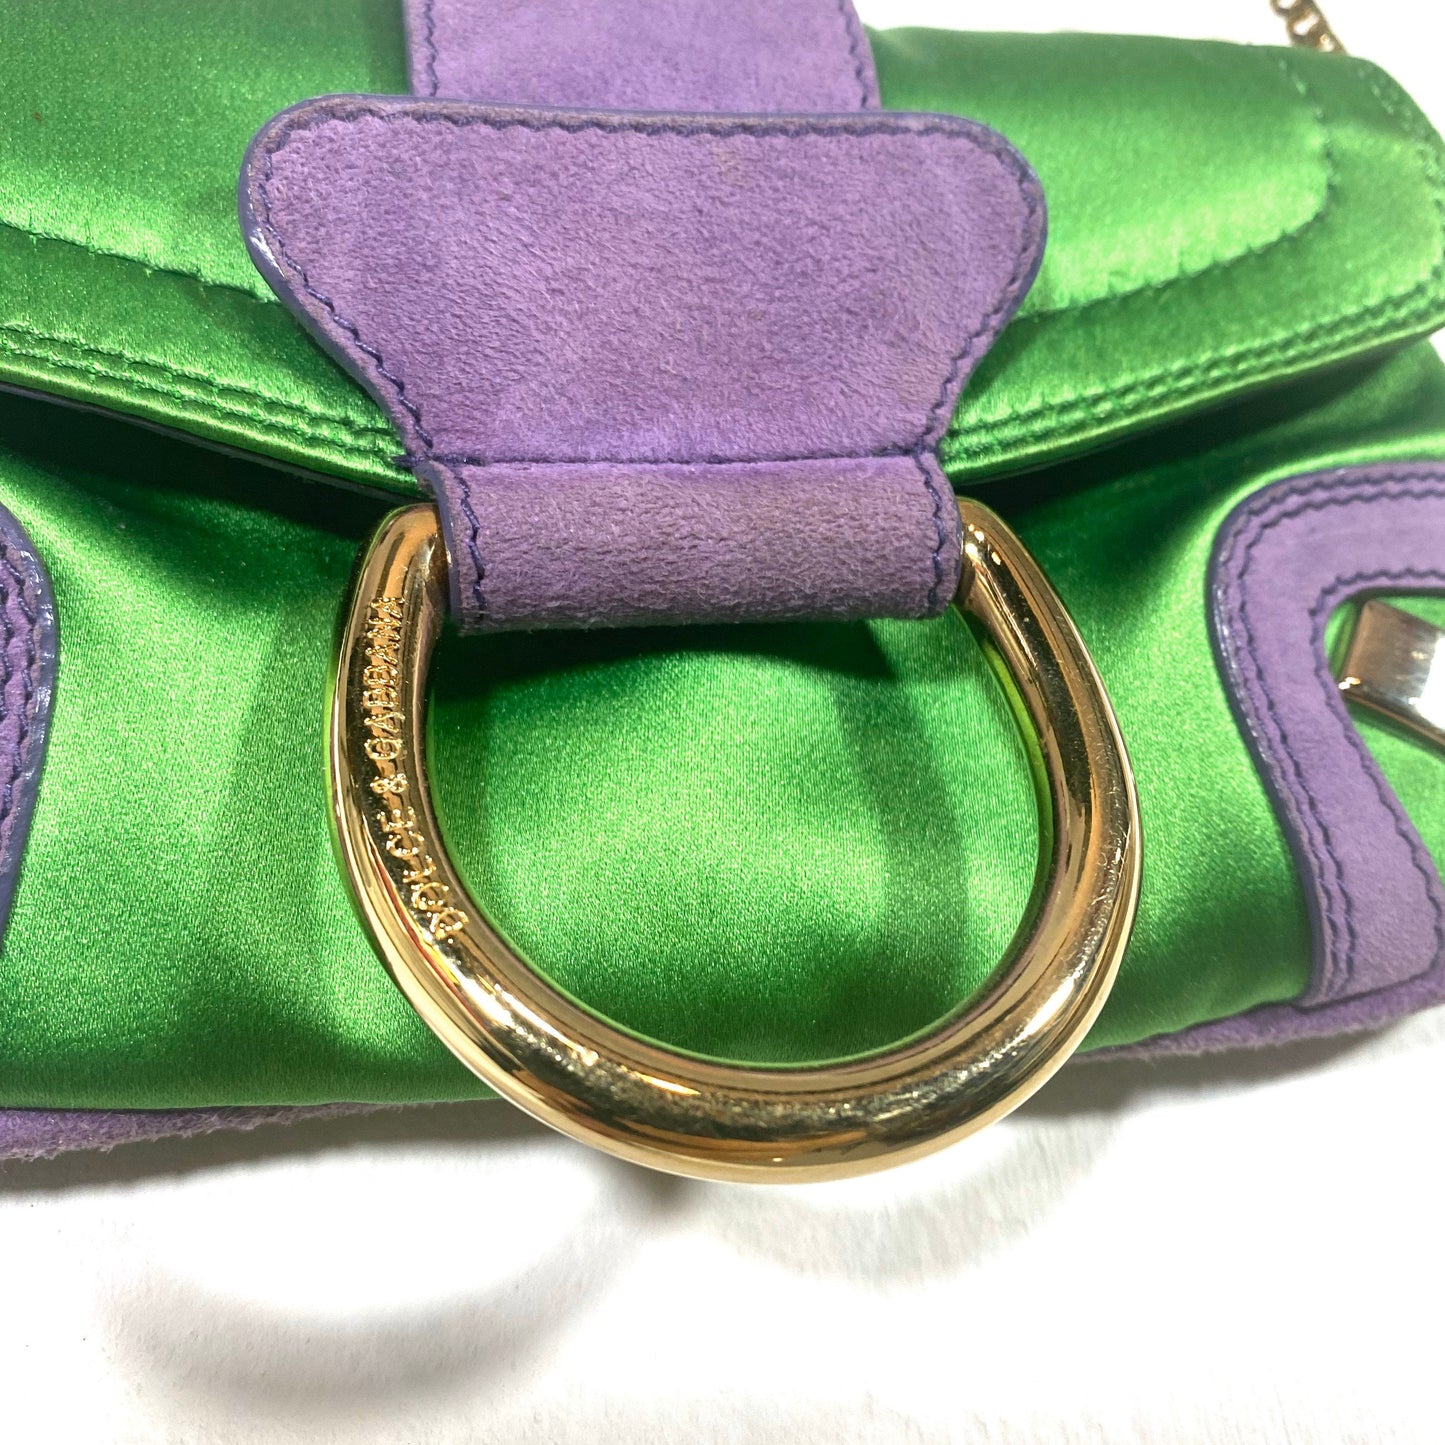 Dolce & Gabbana green/purple pouch bag, great condition.